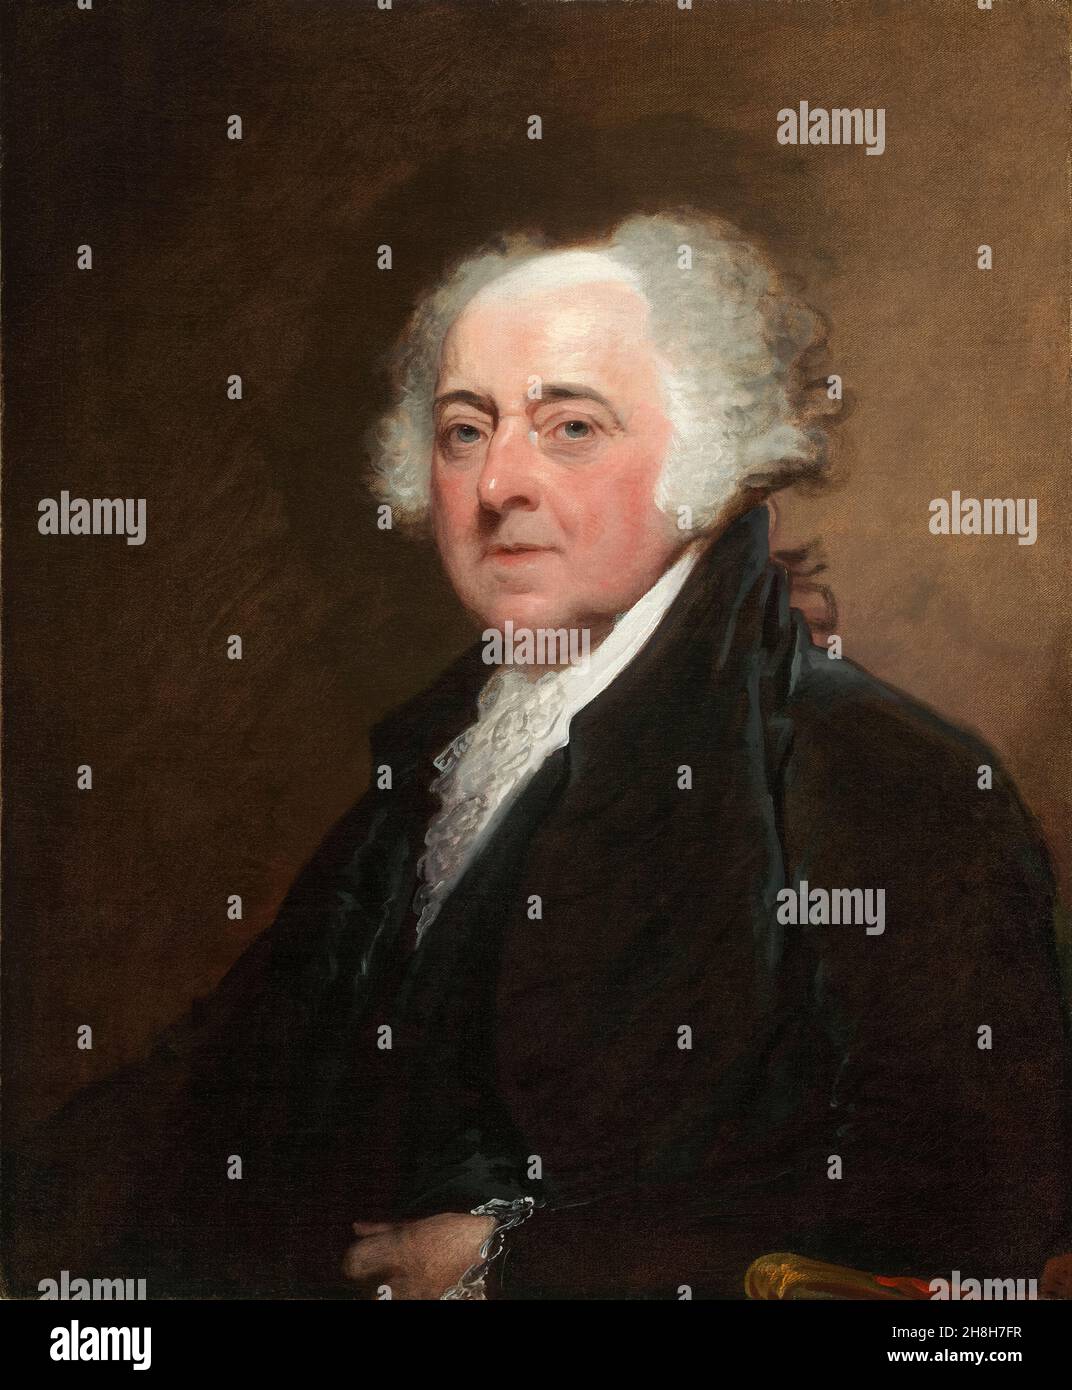 John Adams (1735-1826), American statesman and Founding Father, Second President of the United States, portrait painting by Gilbert Stuart, 1800-1815 Stock Photo